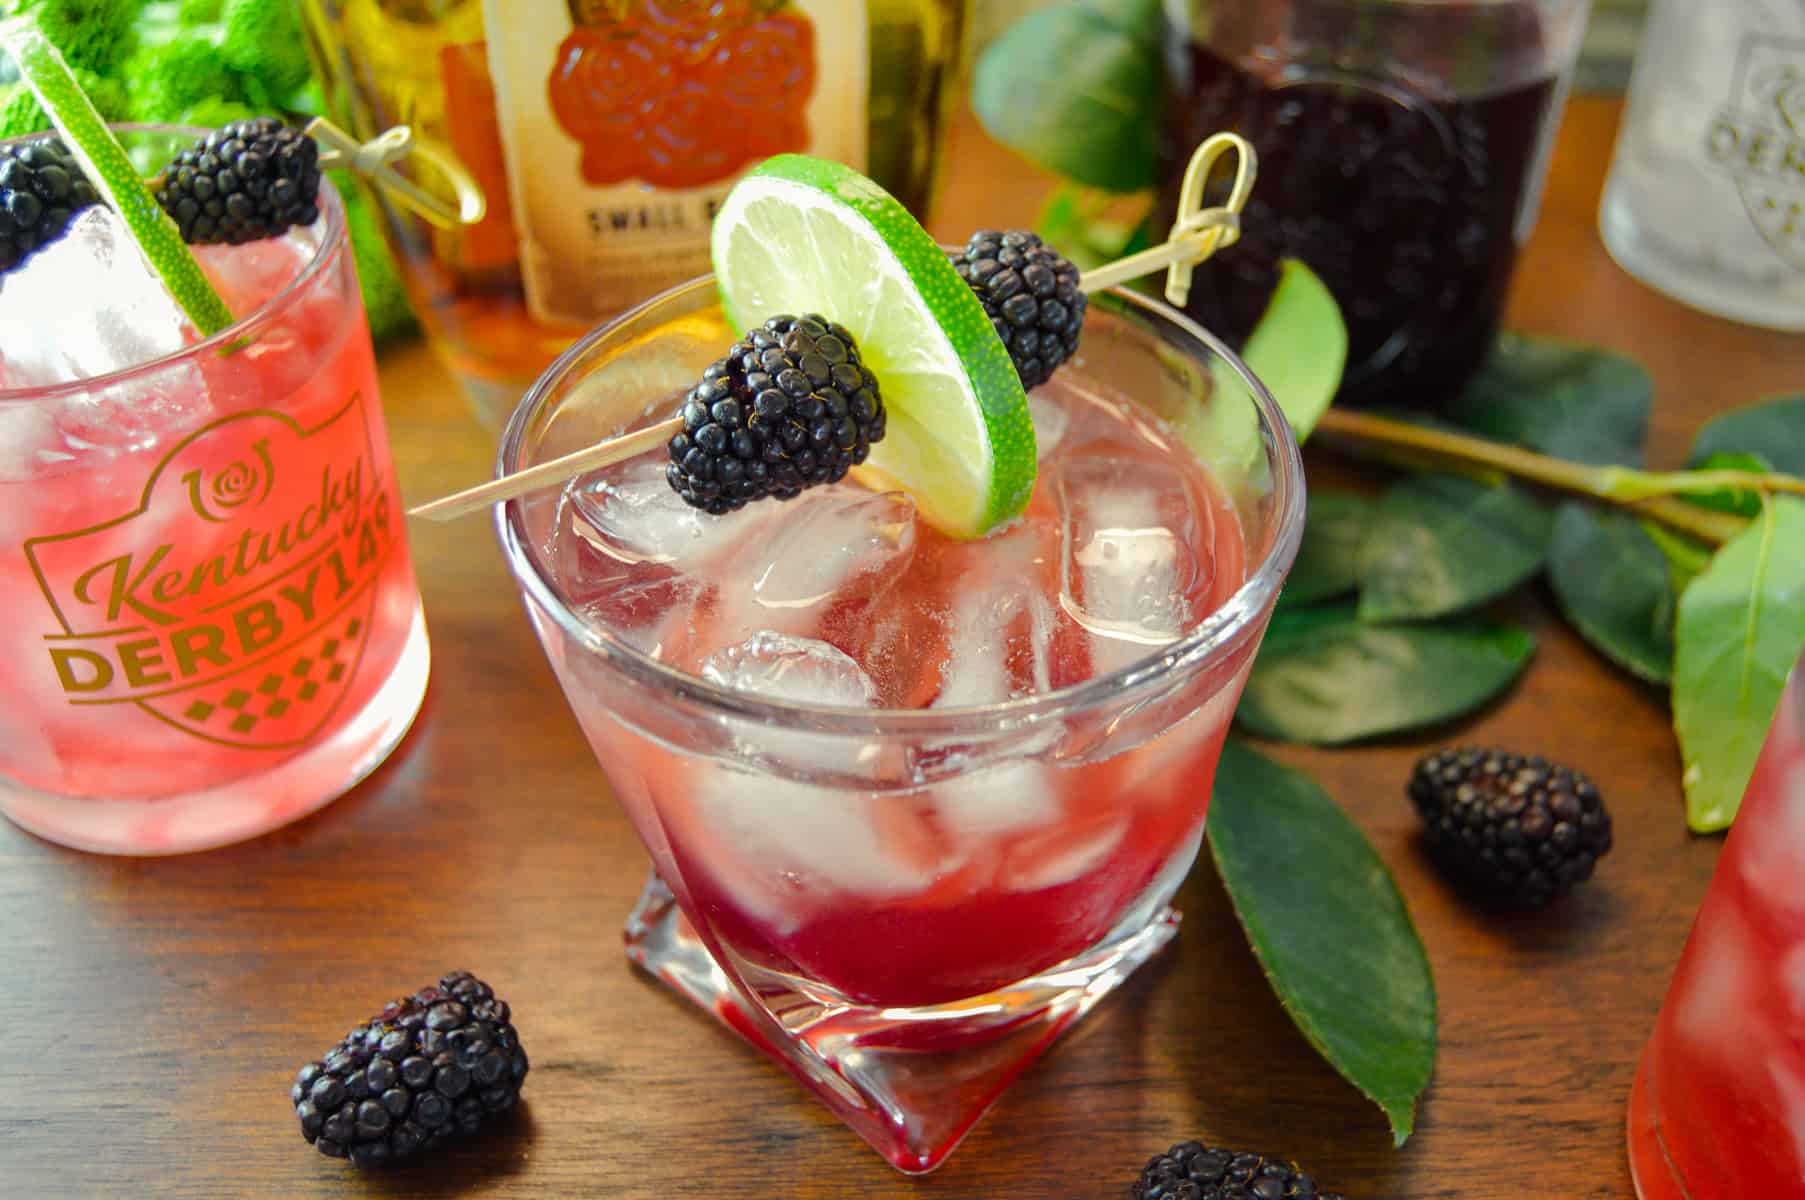 KY bourbon cocktails with blackberries around and pink rose, garnished with lime and blackberries on cocktail pick